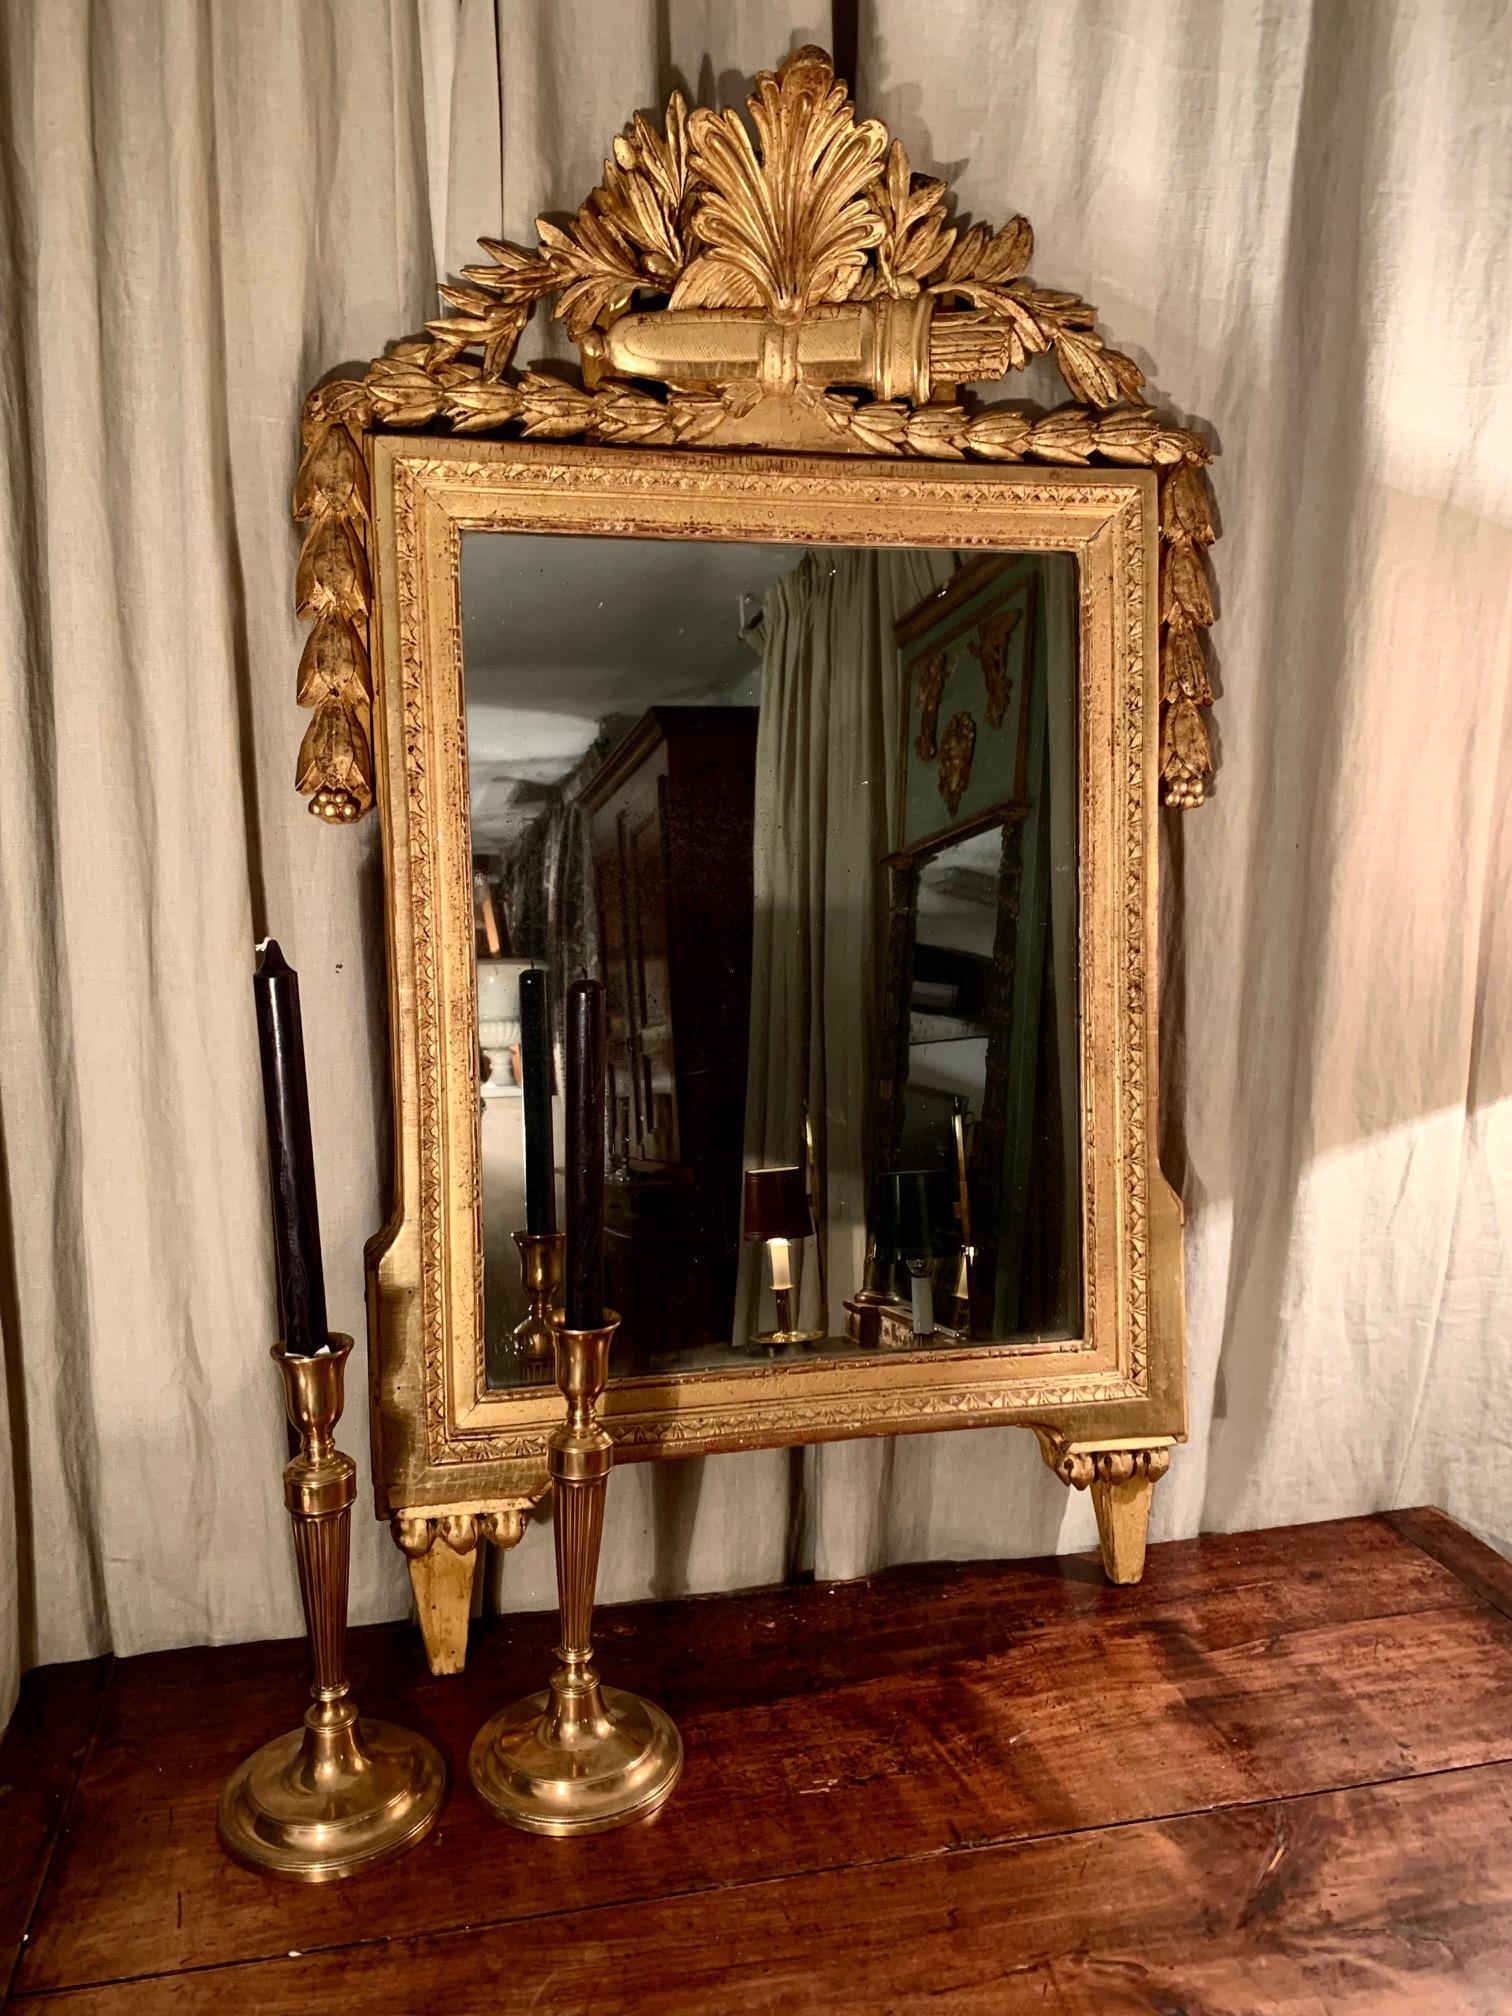 Mirror from France, hand-carved in gilt wood, from the LouisXVI Directory era or period, in the upper part carved in the shape of a vegetable shell and just below a carving of arrows in its case, which possibly symbolizes the arts., on its sides and